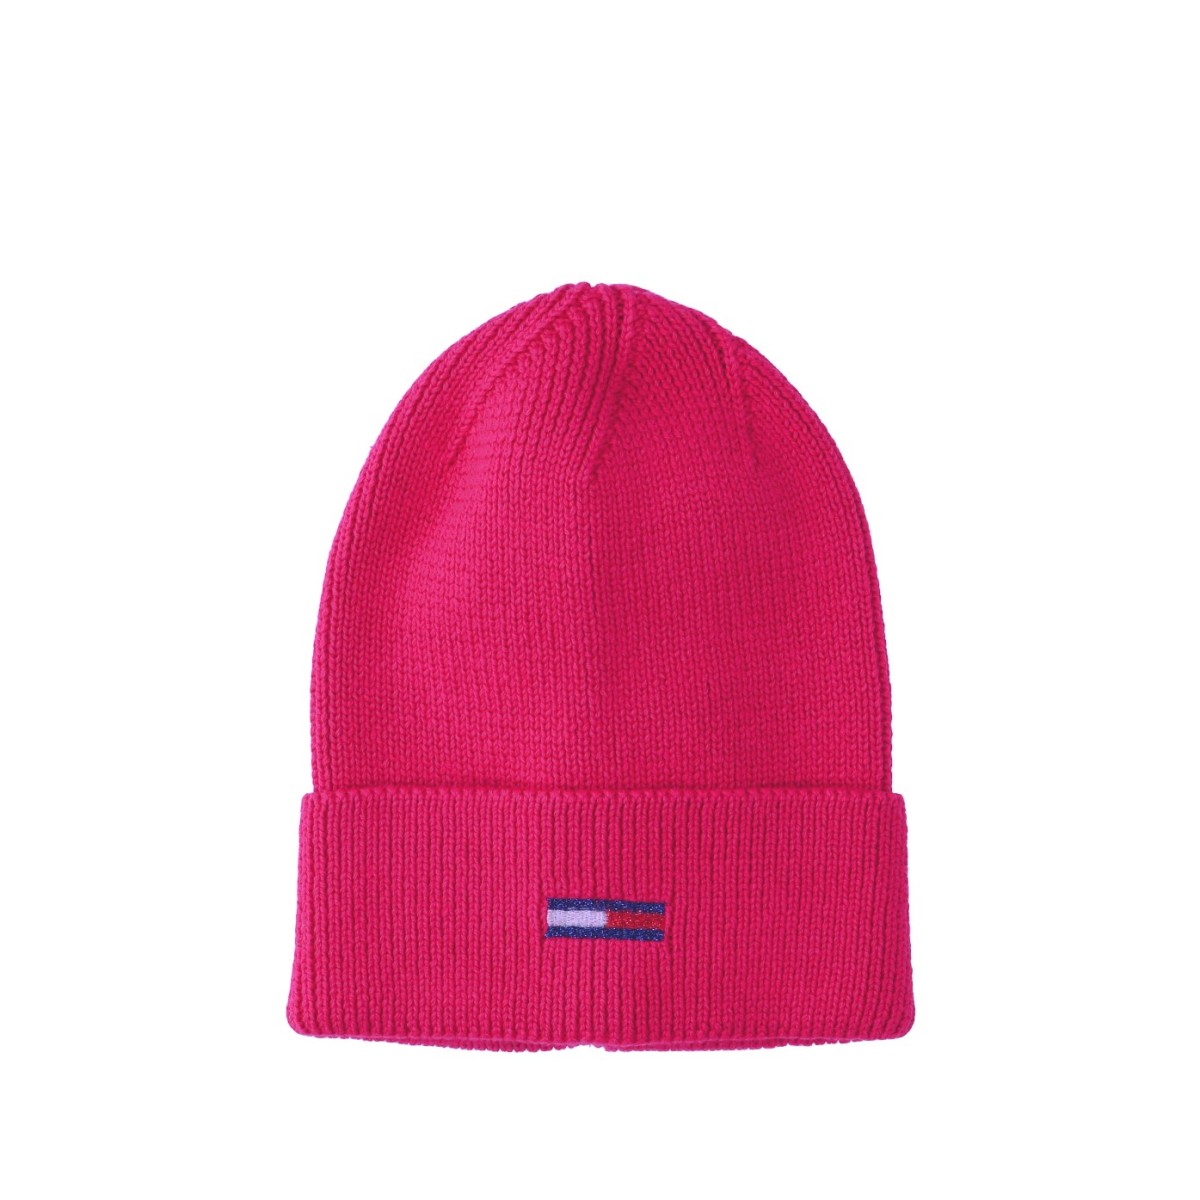 Tommy hilfiger Cappello Fucsia AW0AW15474